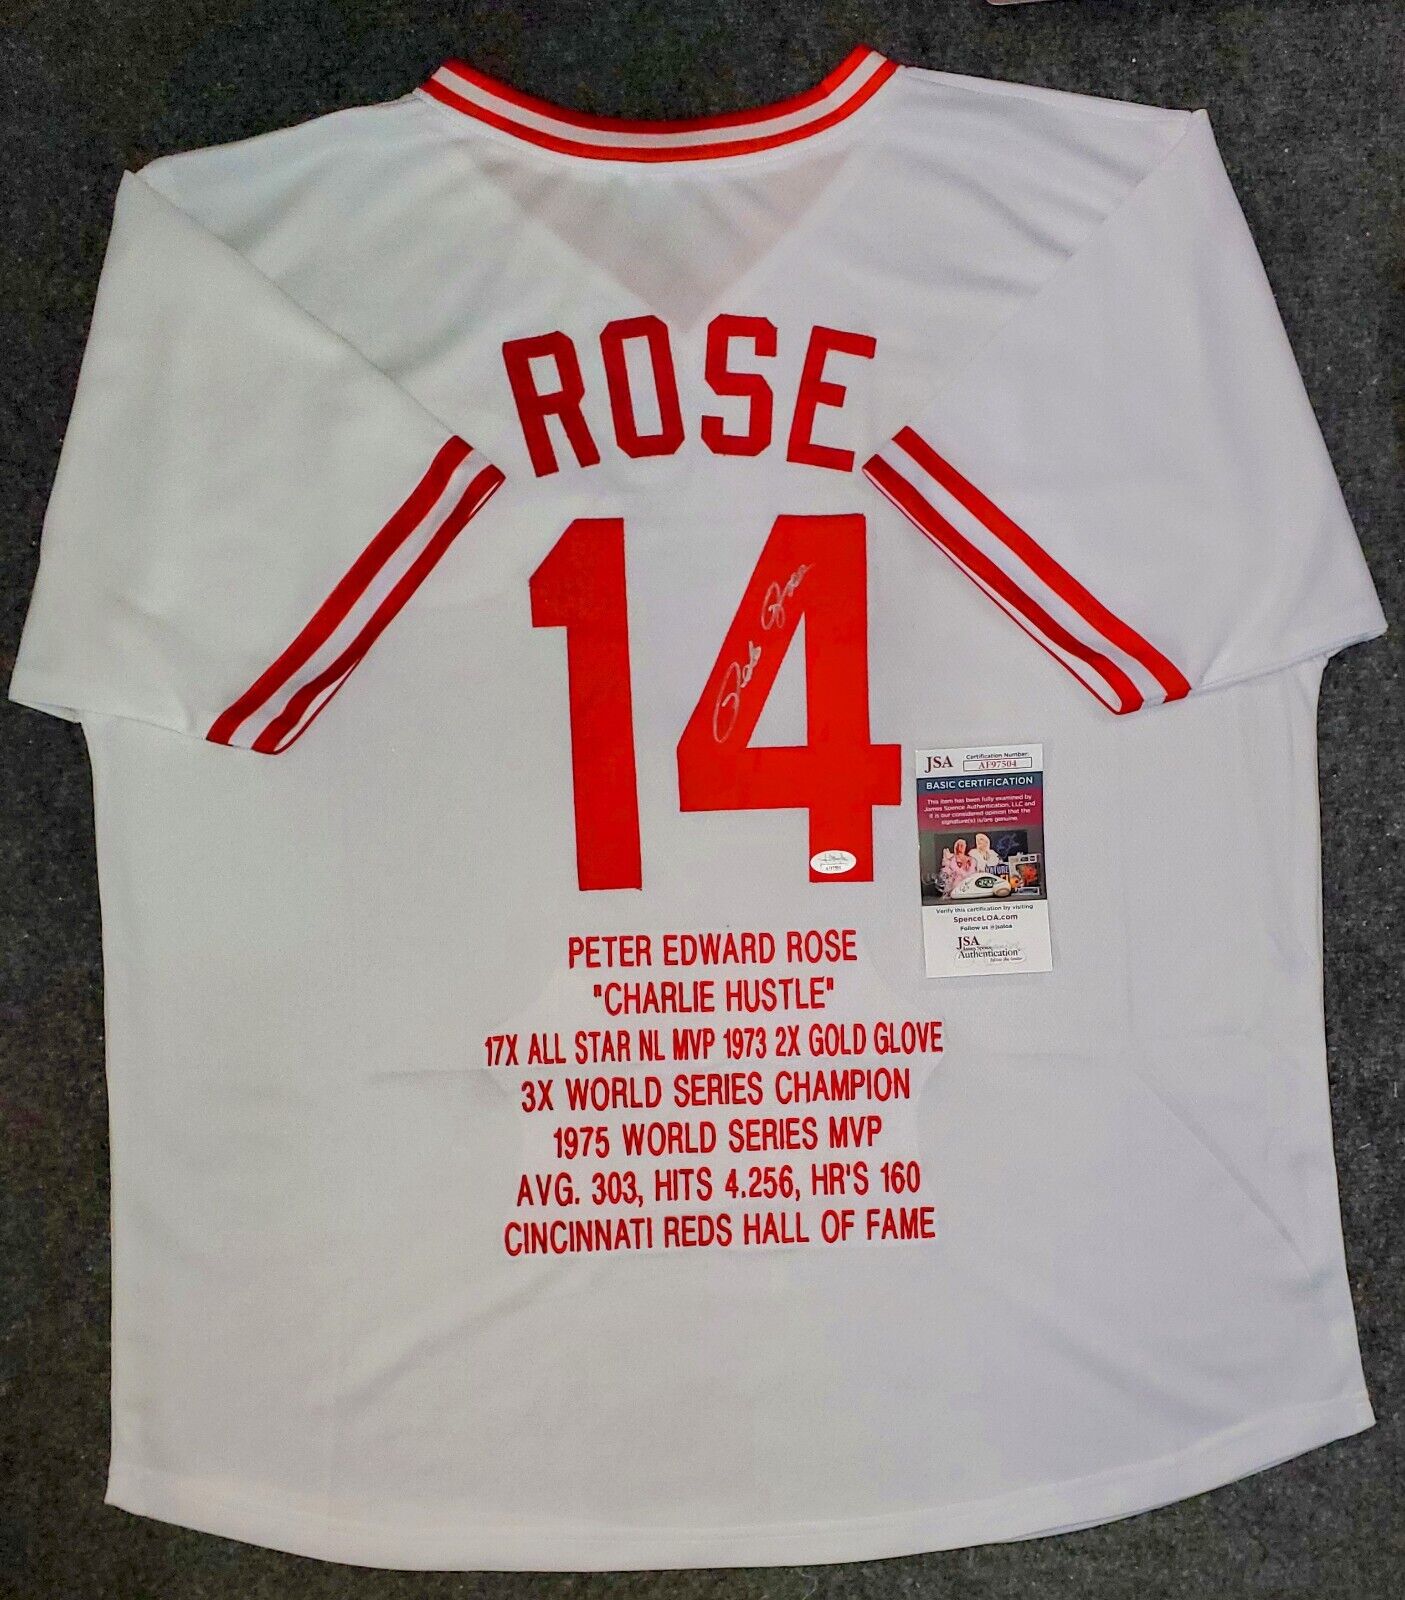 reds personalized jersey